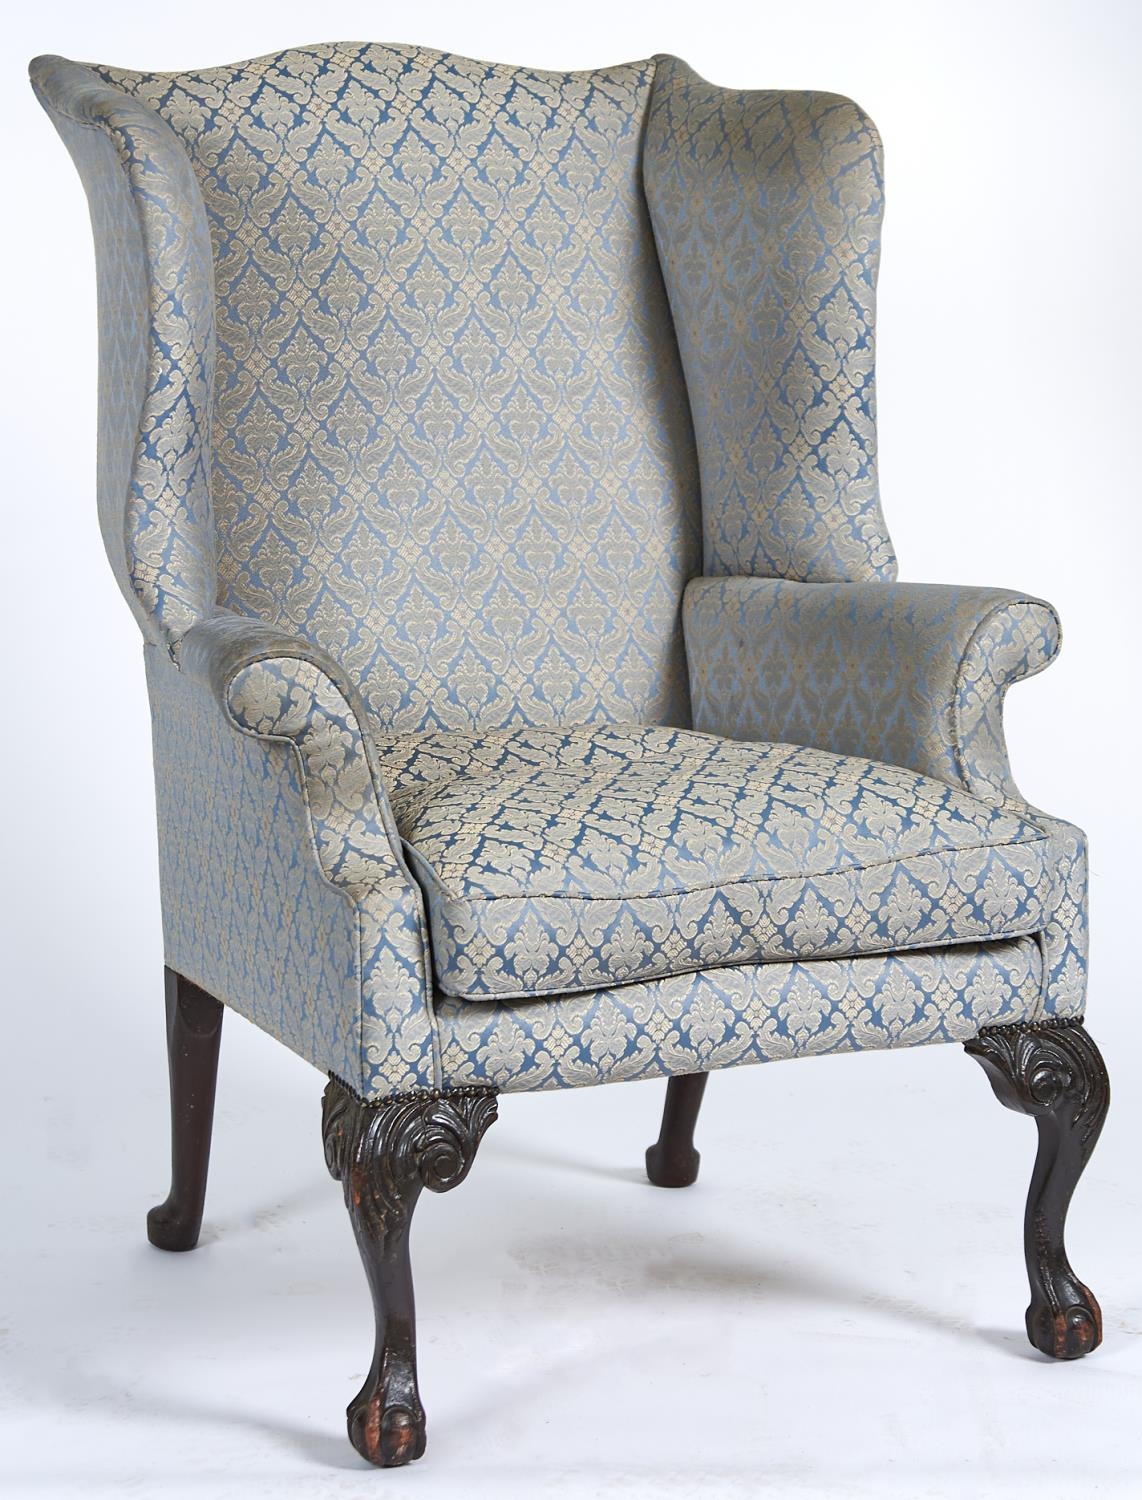 A George II mahogany framed wingback armchair, c1770, the serpentine shaped back, wings, arms and